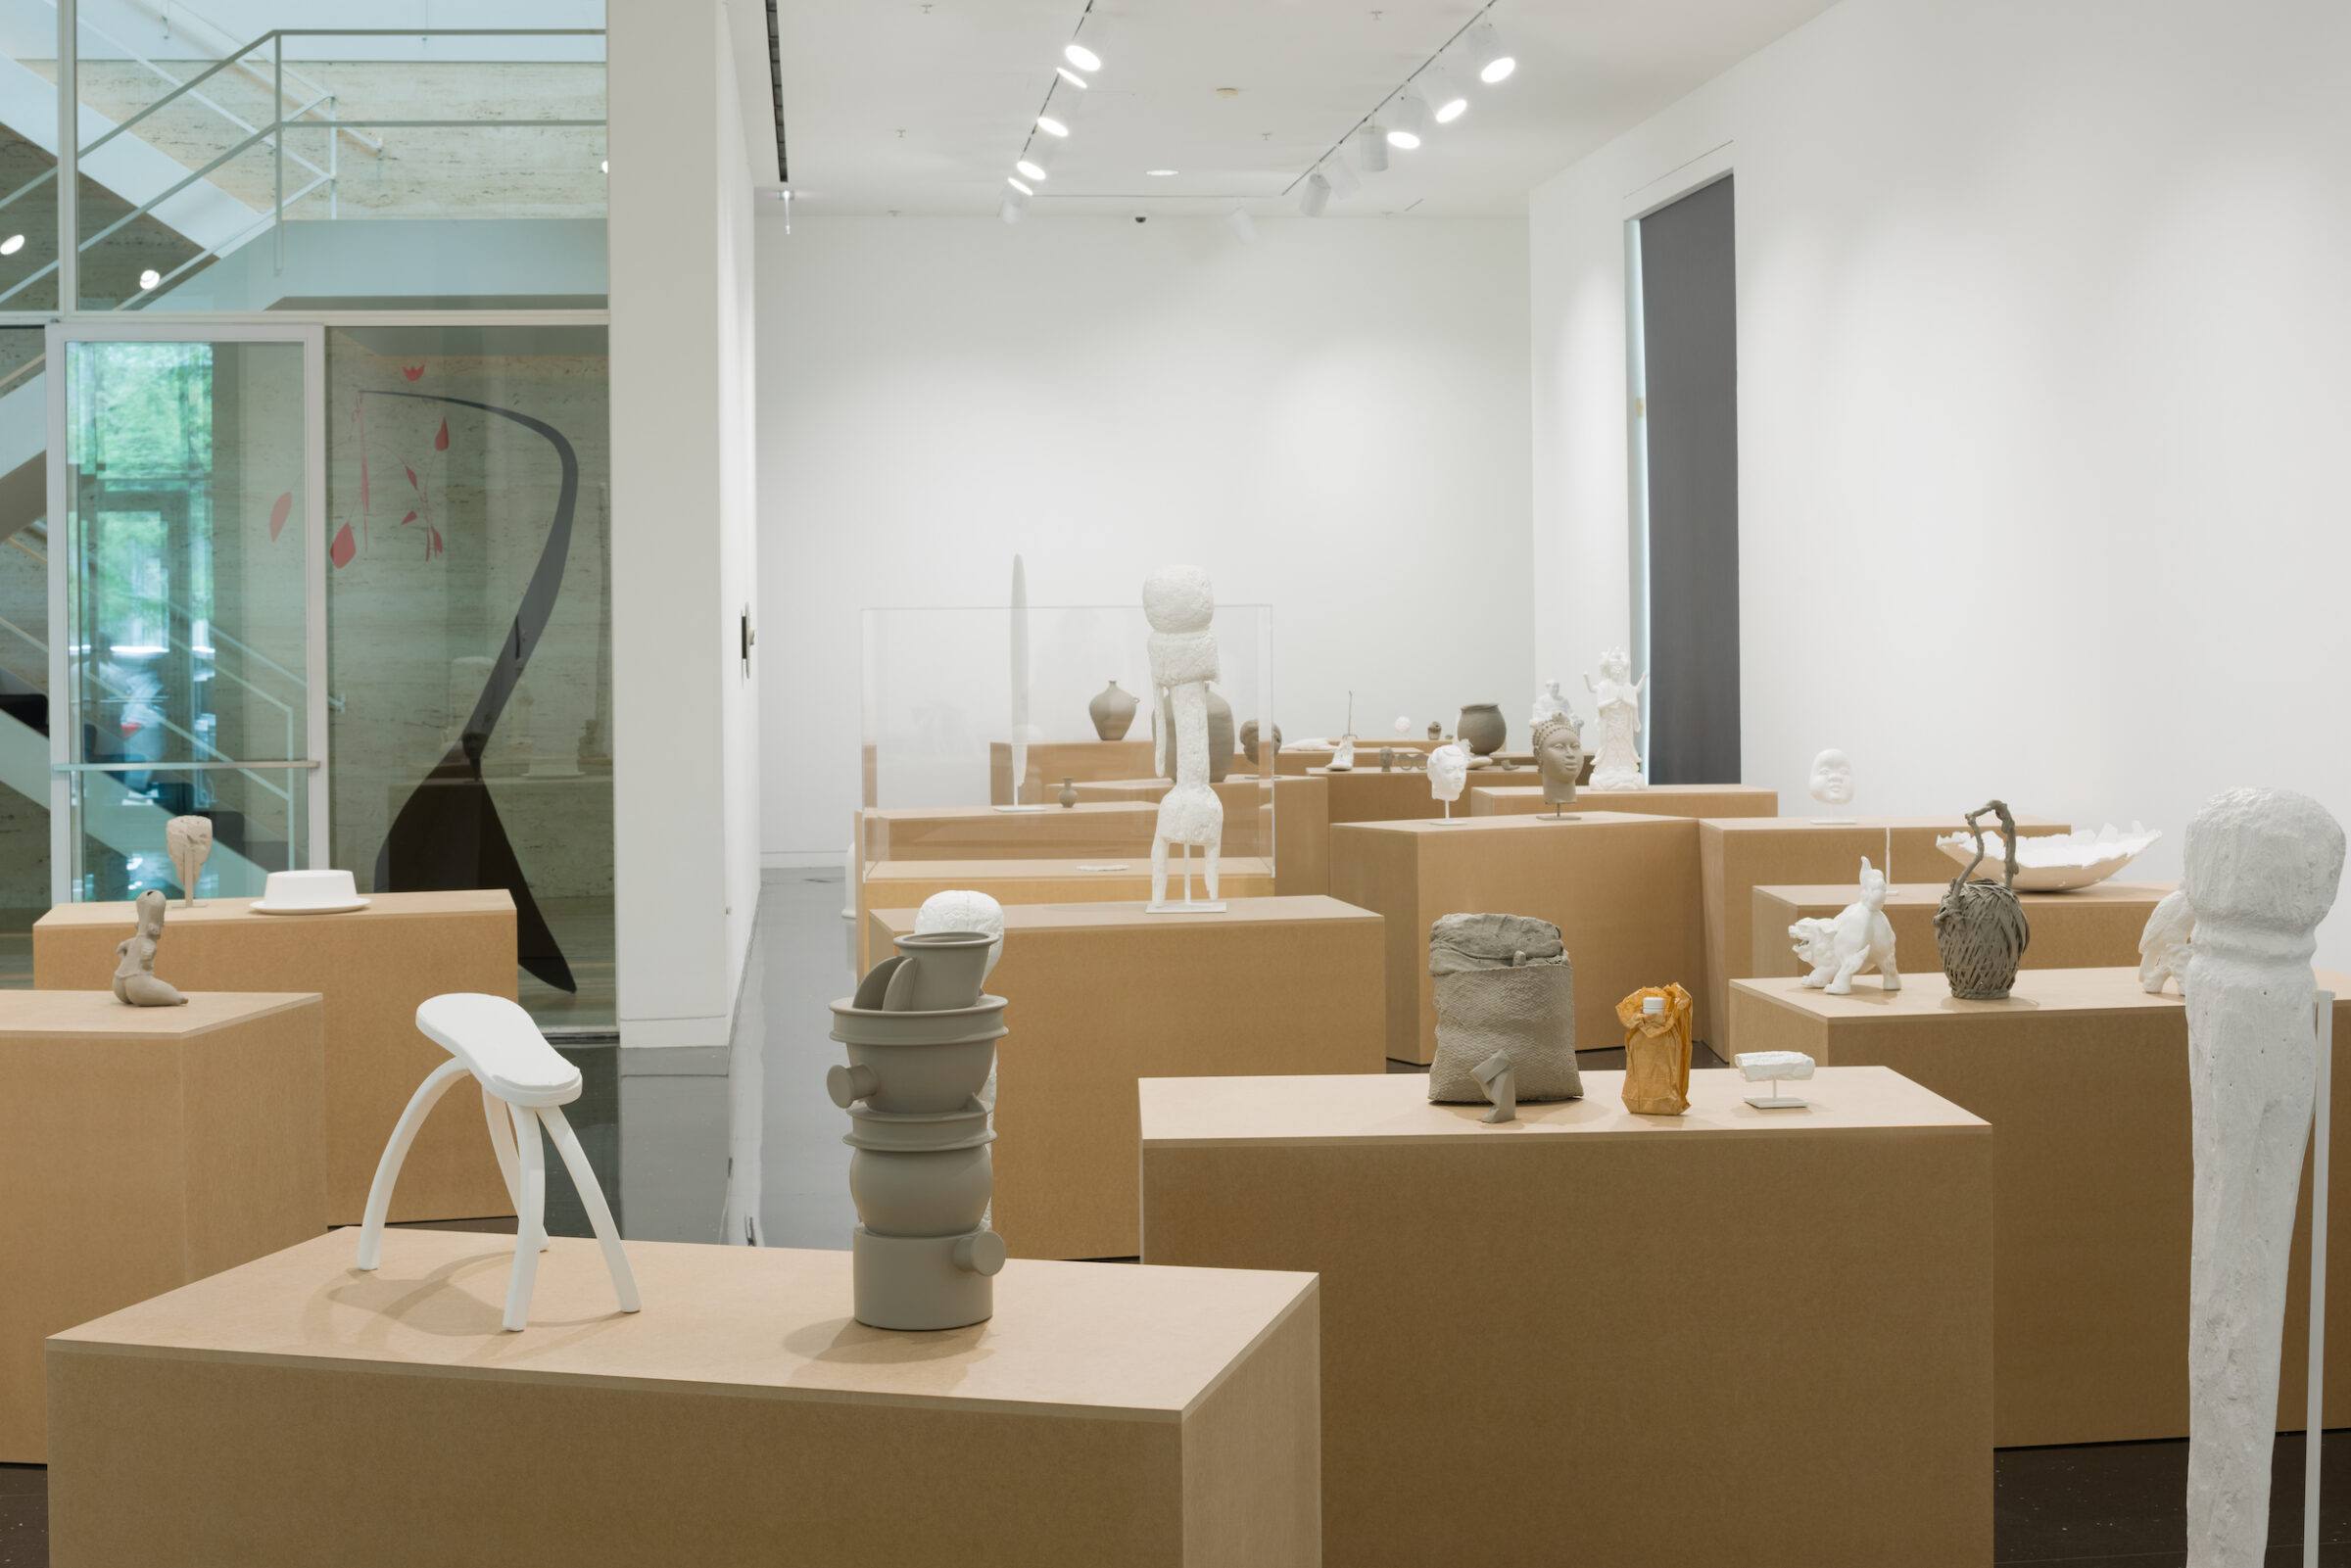 Over a dozen pedestals resembling cardboard boxes installed in a white gallery. Atop each pedestal are several unglazed ceramic sculptures, some fired and some unfired, raw clay. Sculptures include heads and busts, vases, baskets, and animals.